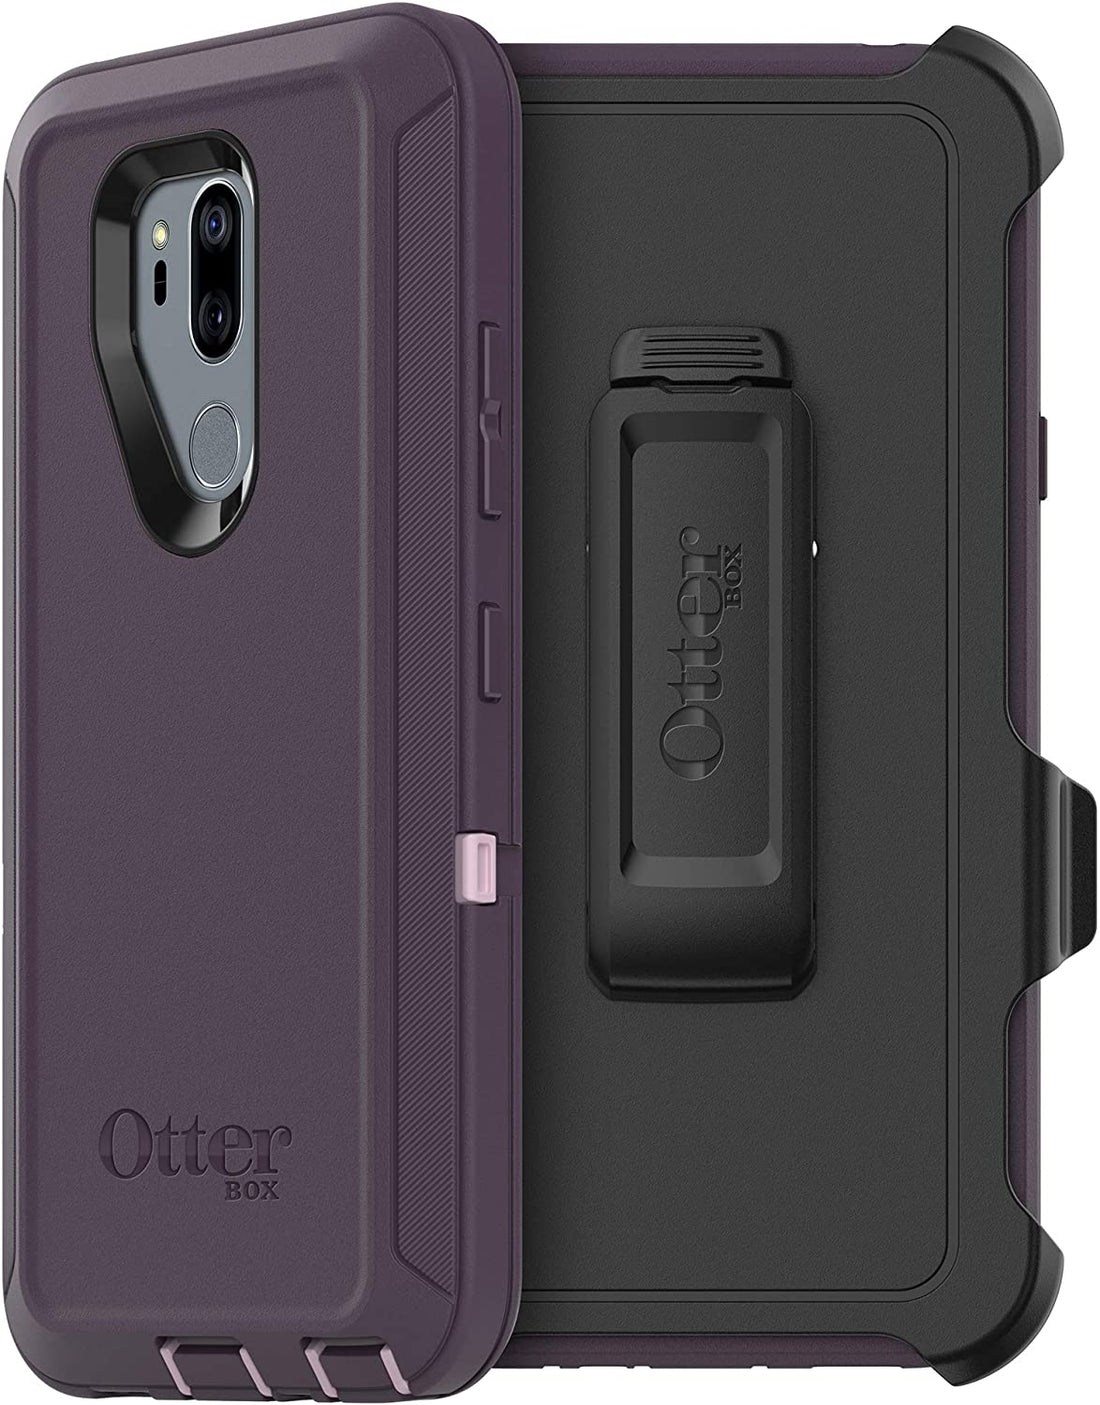 OtterBox DEFENDER SERIES Case &amp; Holster for LG G7 ThinQ - Purple Nebula (New)